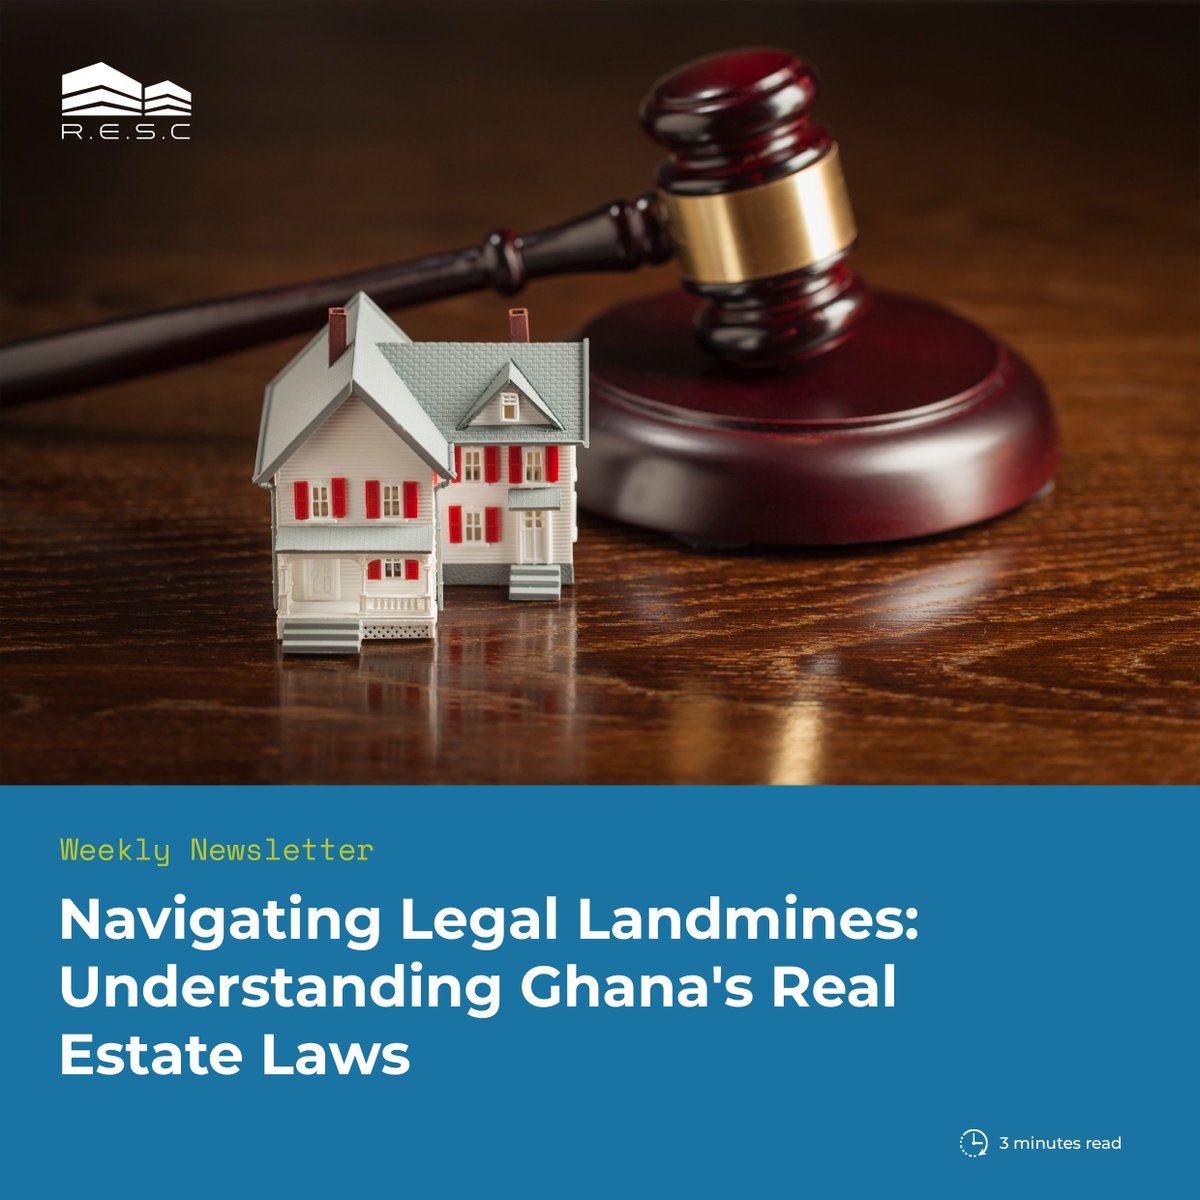 'Unraveling Ghana's Real Estate Laws: Legal Insights to Safeguard Your Property Journey 📜🏡 #GhanaRealEstate #LegalLandmines'